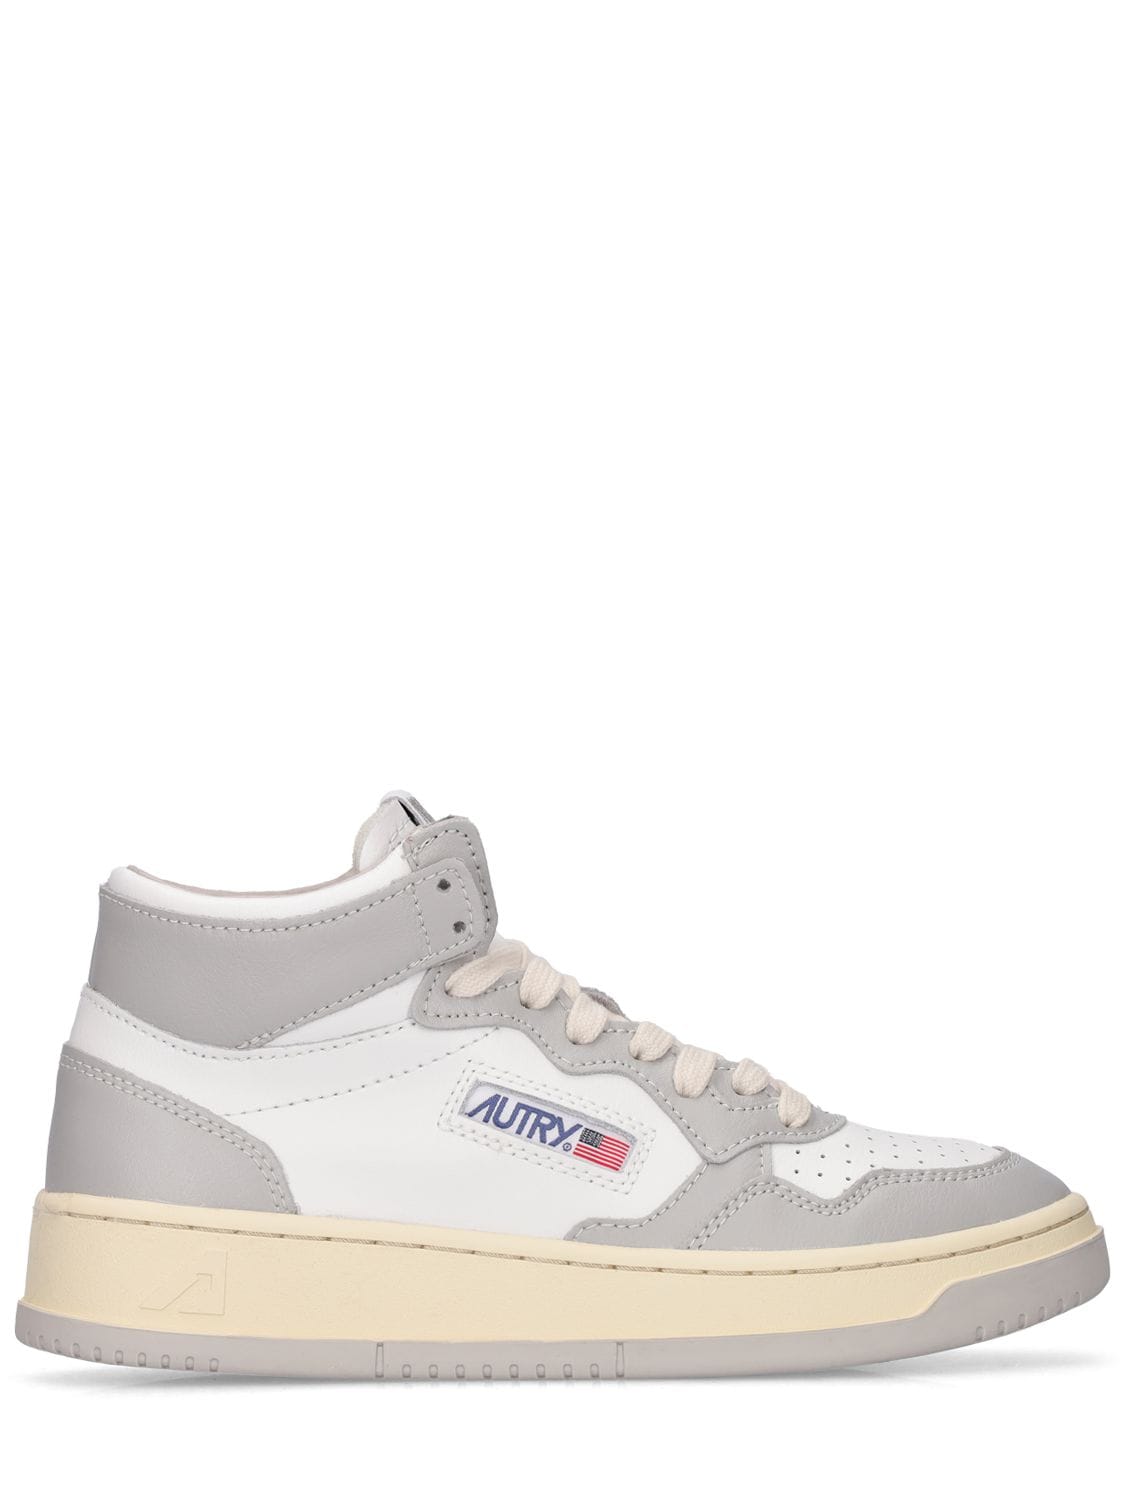 AUTRY MEDALIST TWO-TONE HIGH LEATHER SNEAKERS